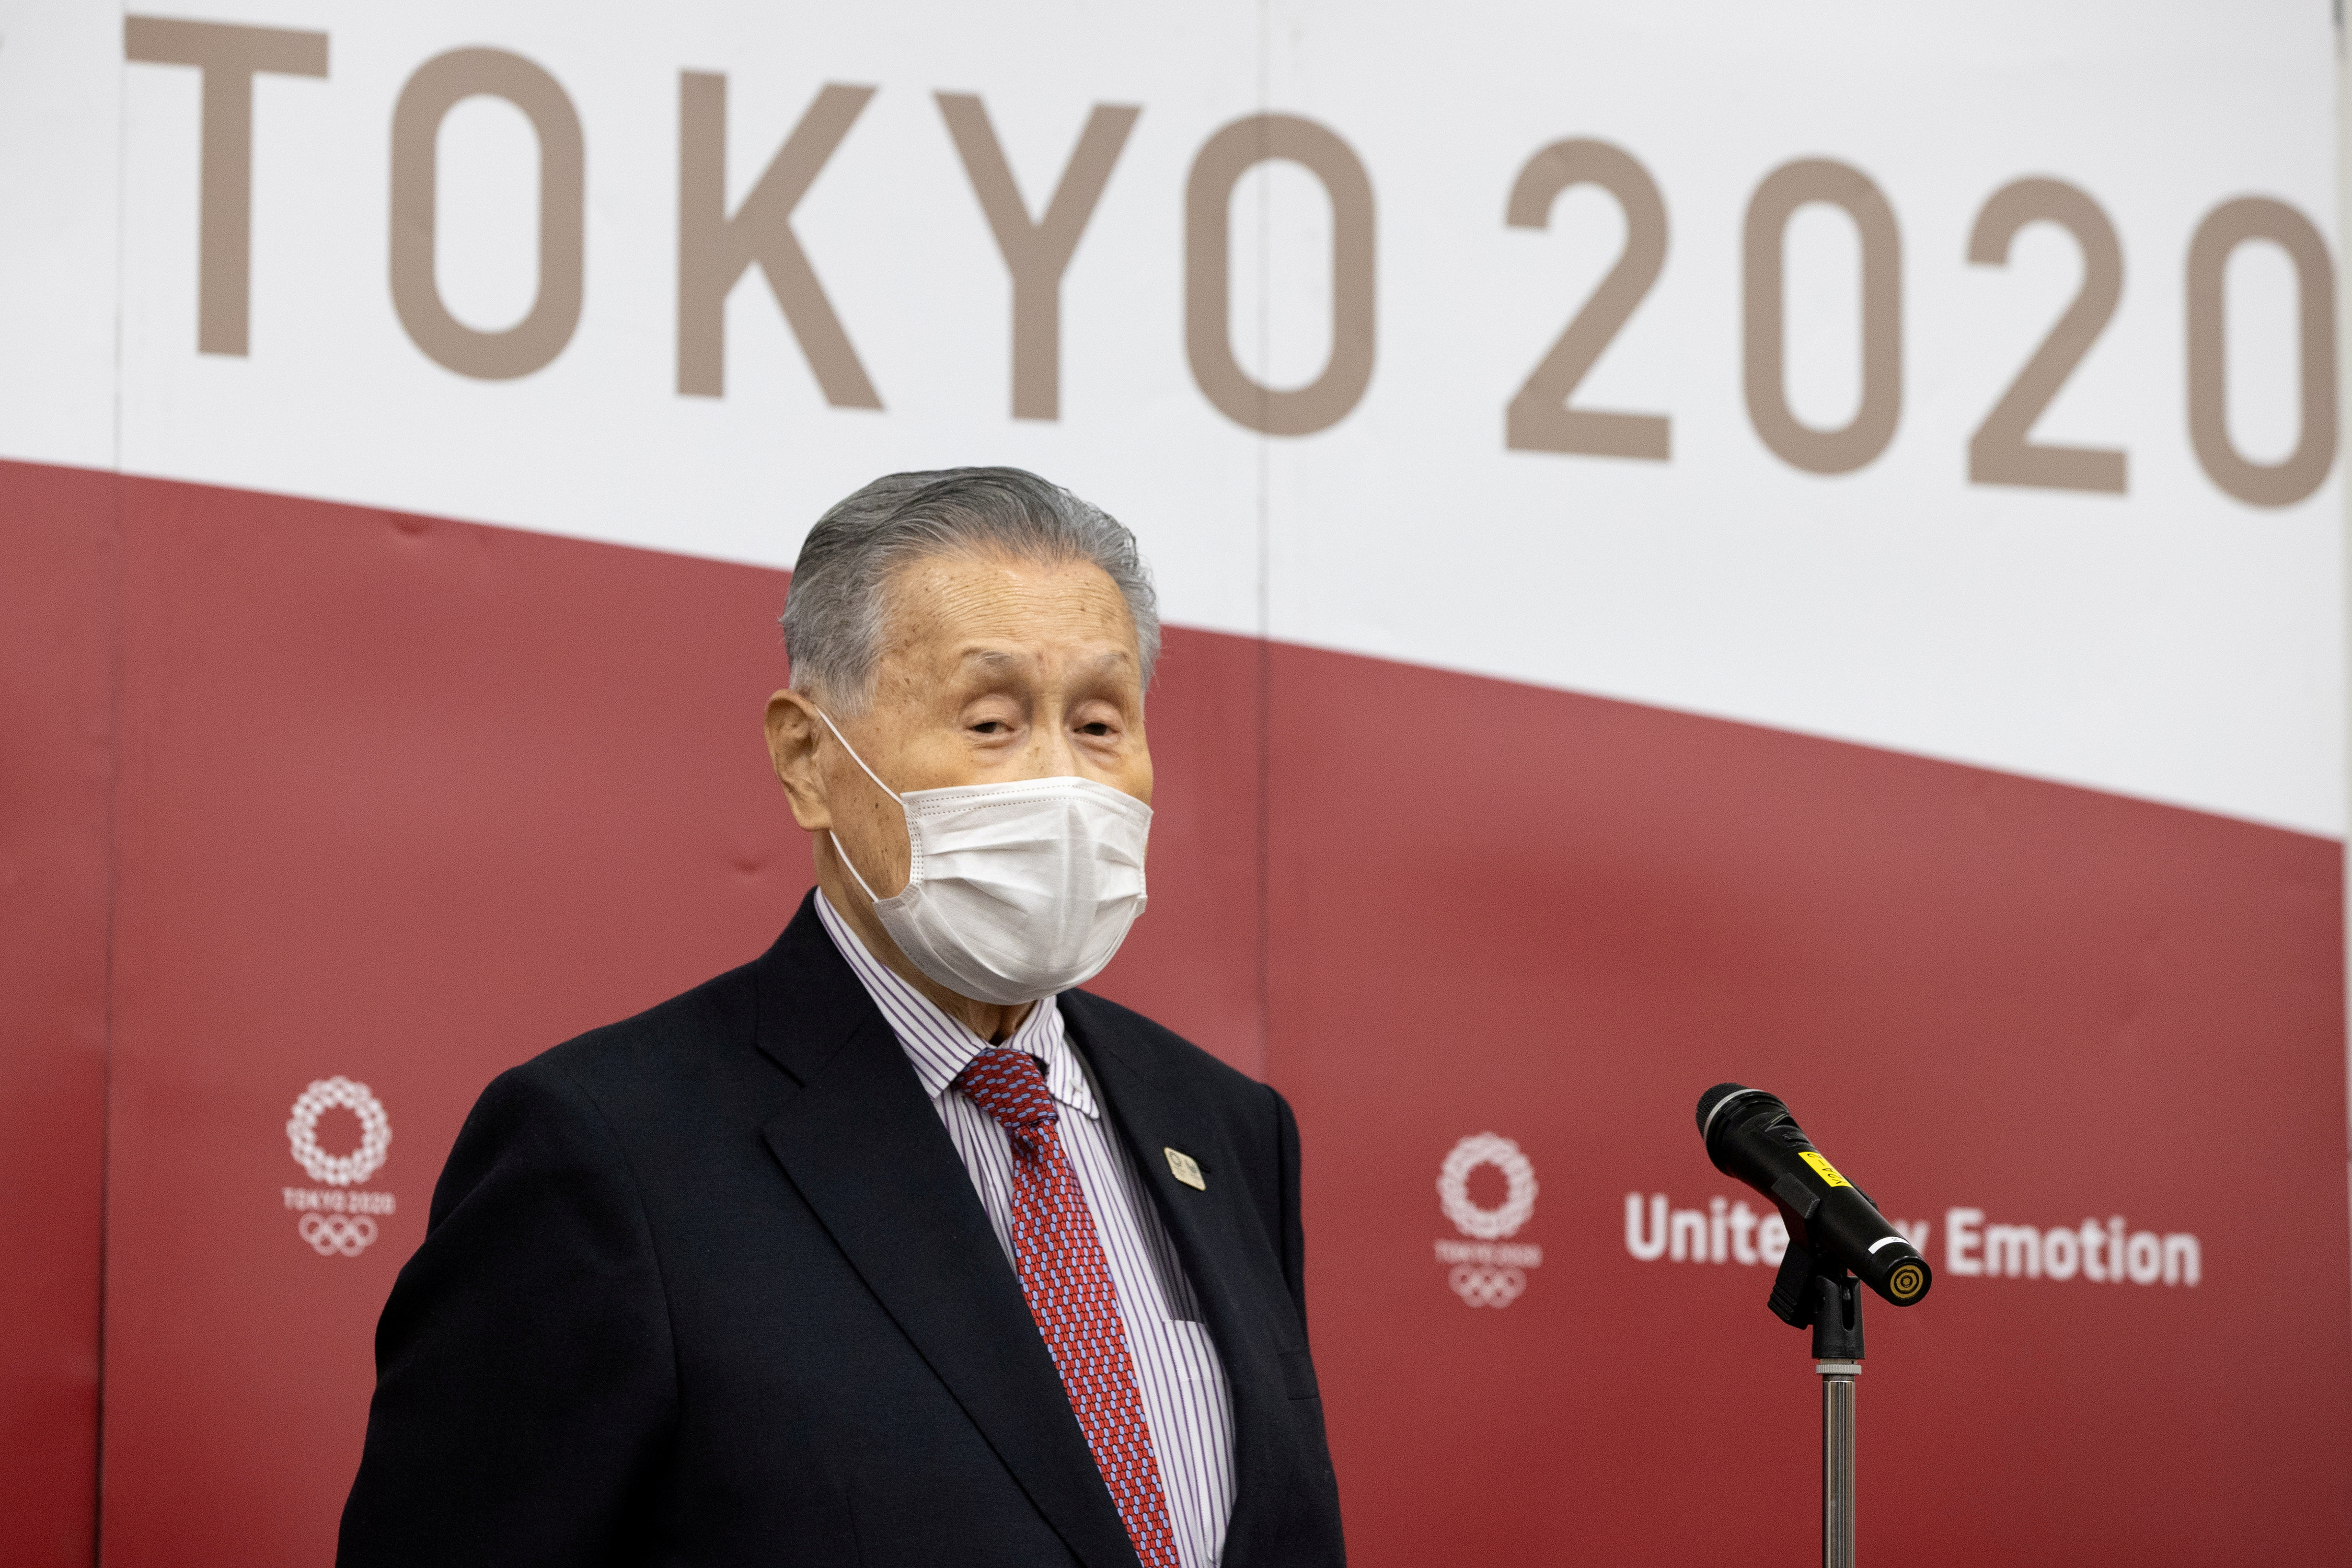 Olympics-Tokyo 2020 officials speak to media after video call with IOC's Bach